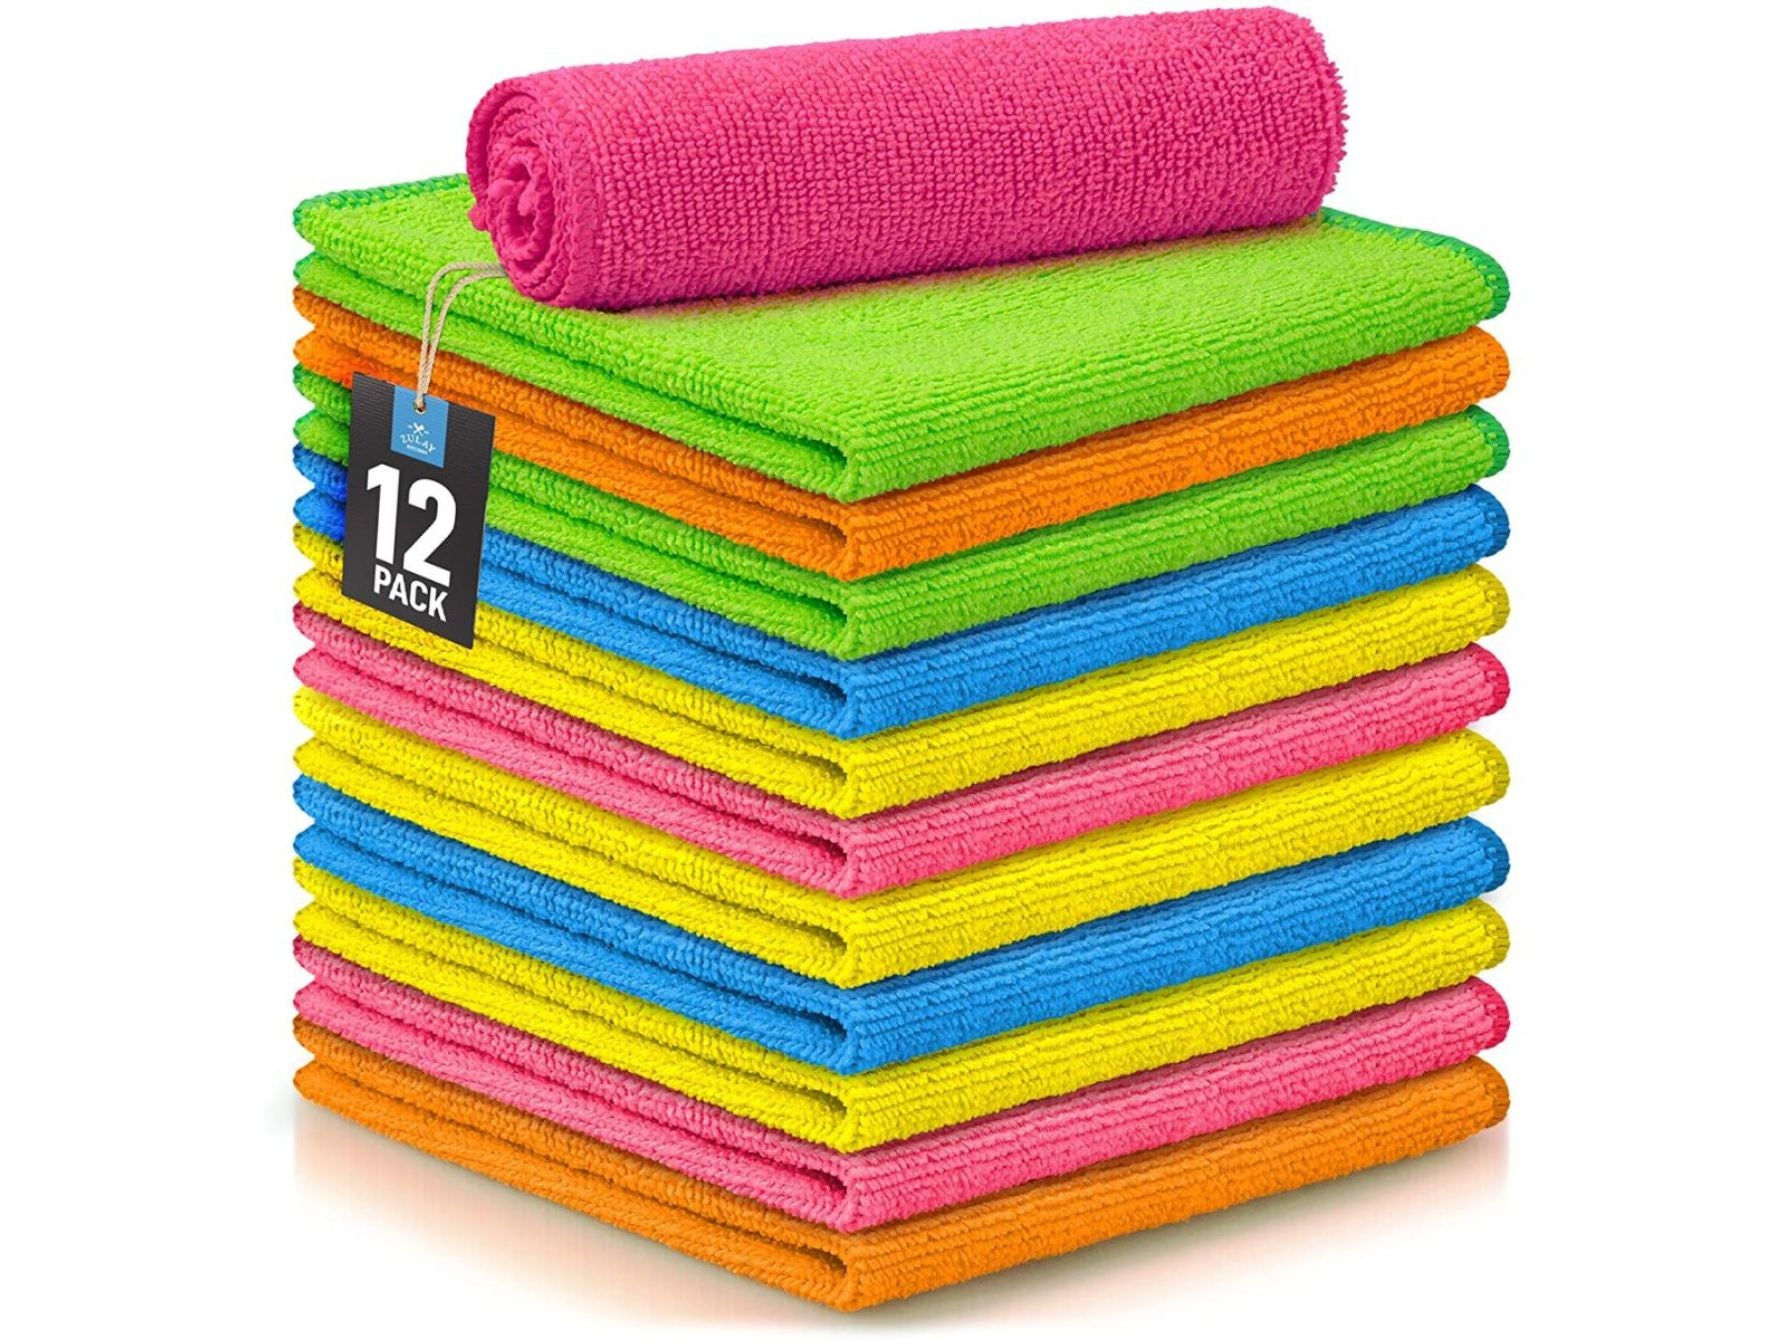 Top-Spring microfiber dish cloths with scrub side kitchen rags for